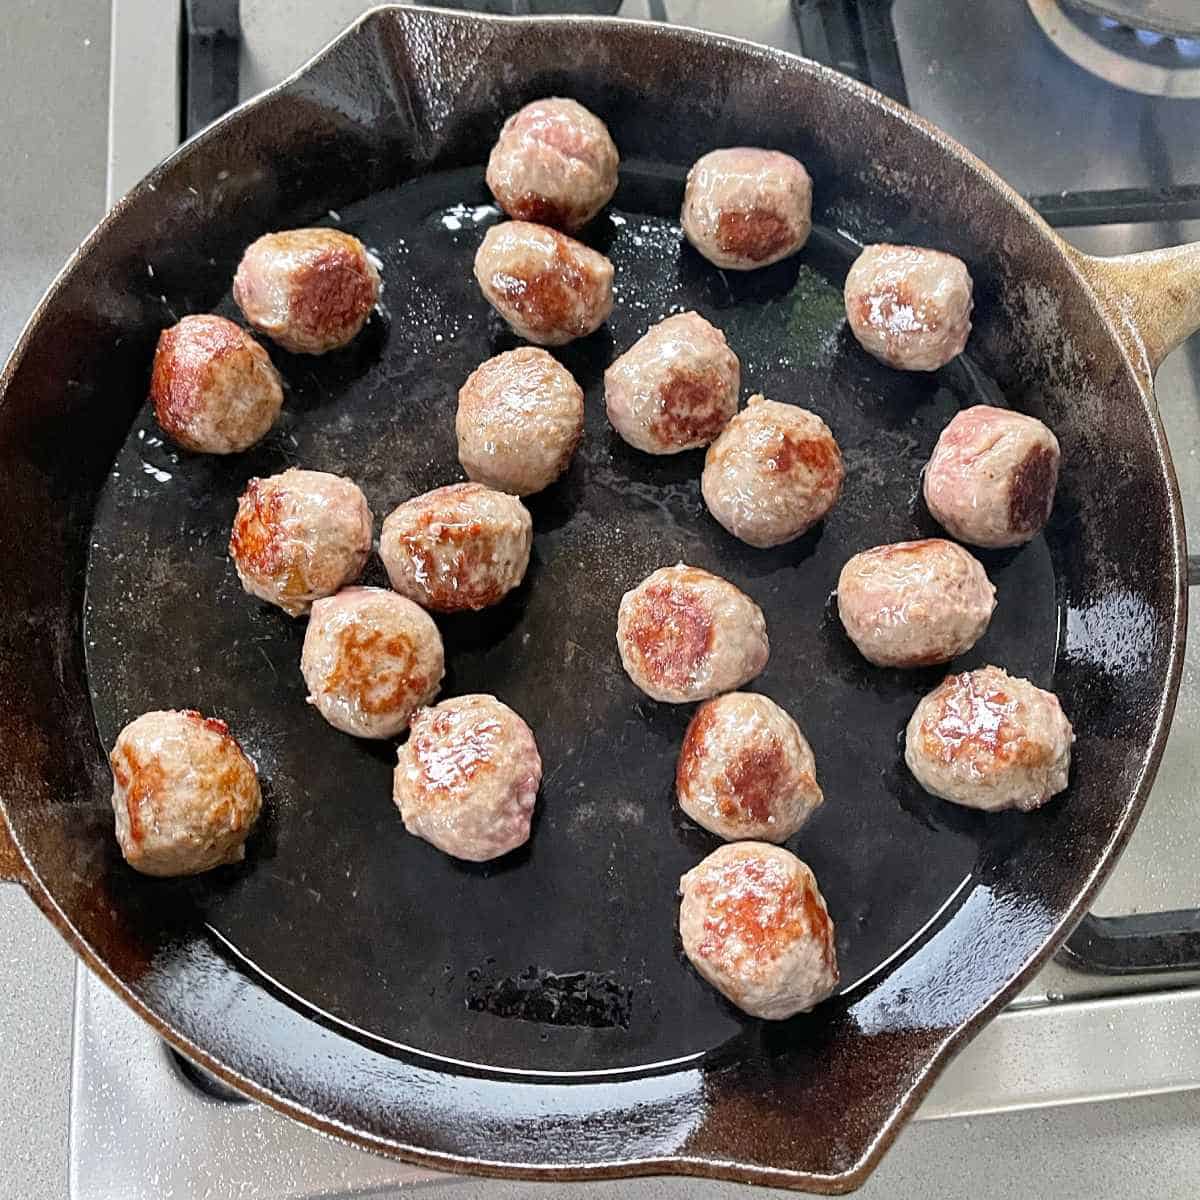 Raw meatballs being cooked until browned in a medium frypan over a medium heat